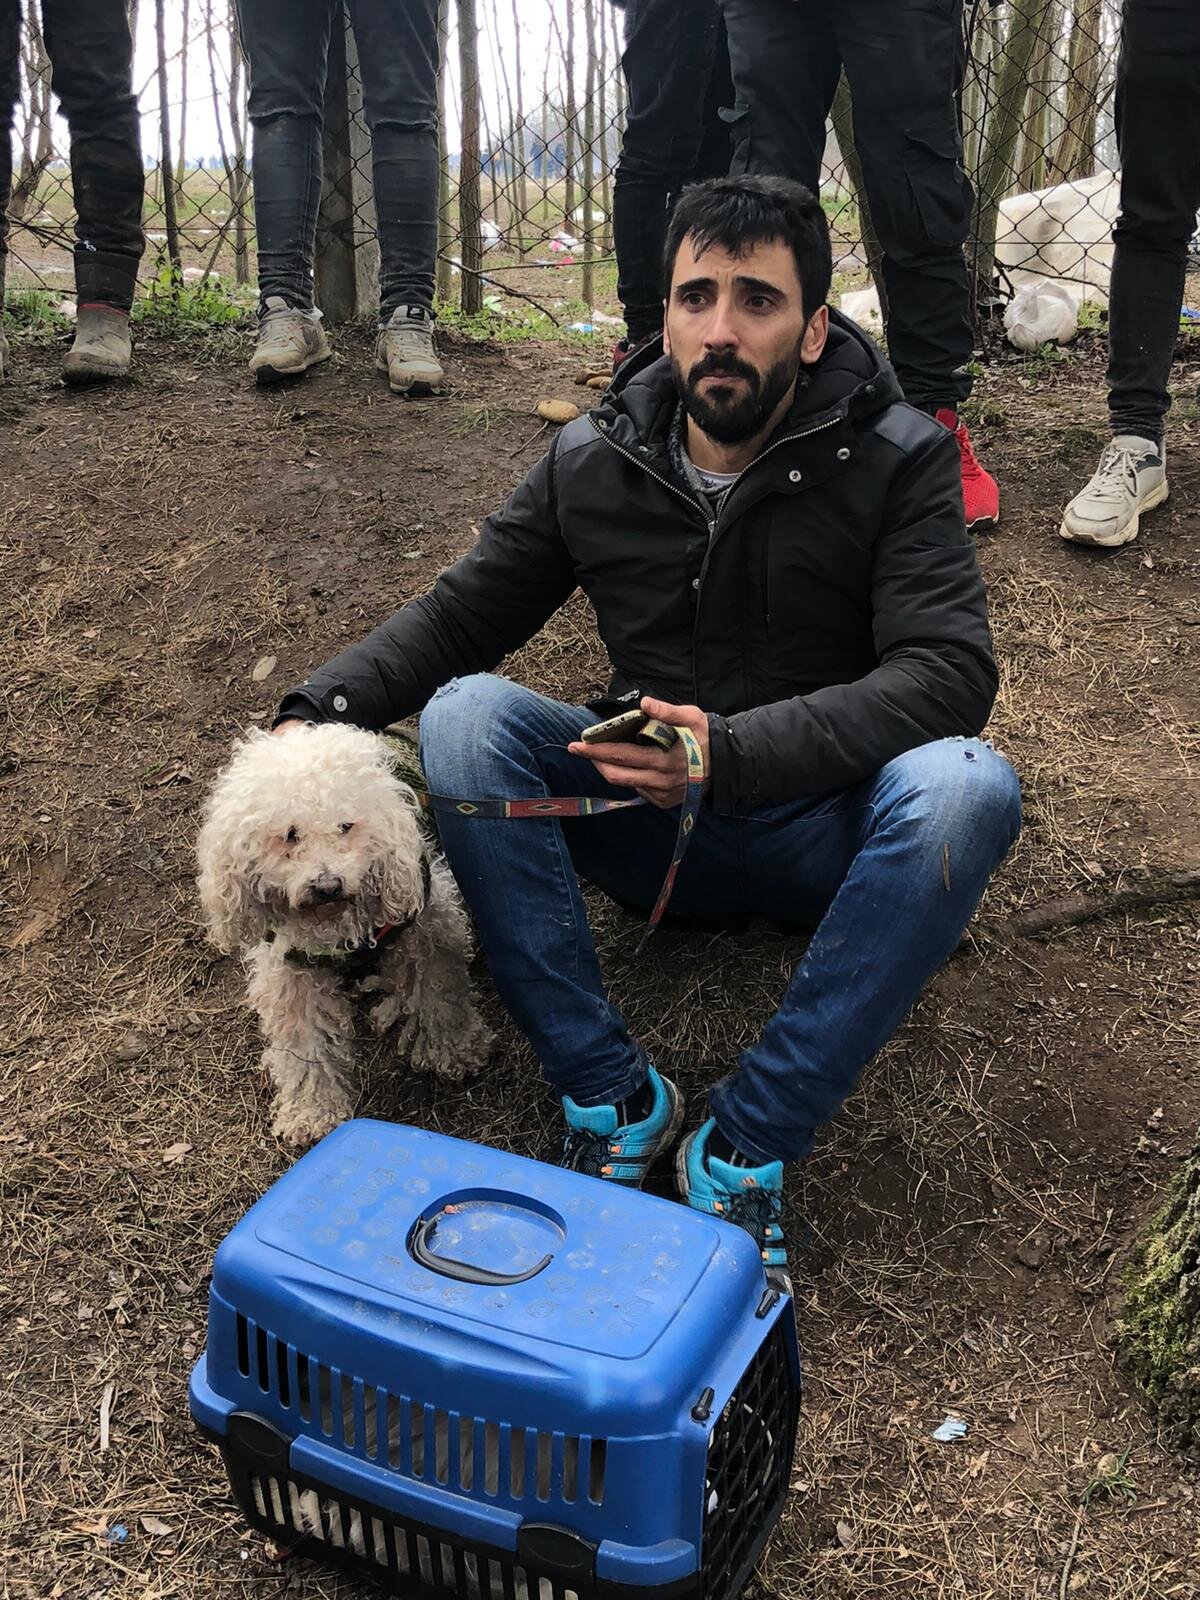   Ahmed (Syria) with his dog and cat, in Pazarkule, Turkey. 28 February 2020. ©Migrants of the Mediterranean  